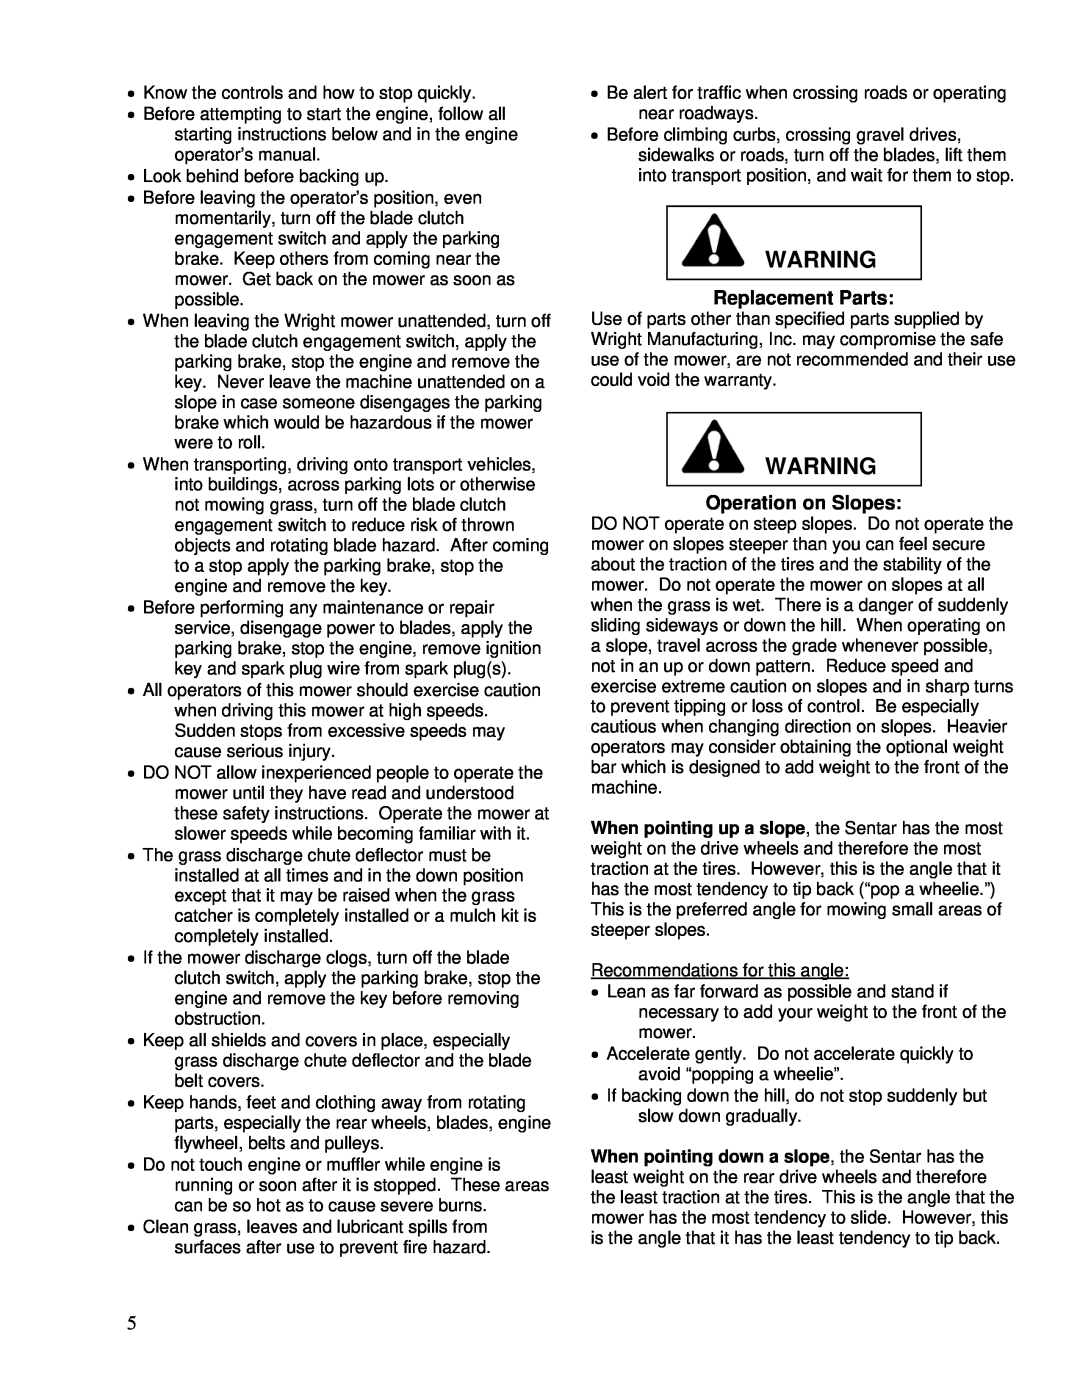 Wright Manufacturing 26980 owner manual Replacement Parts, Operation on Slopes 